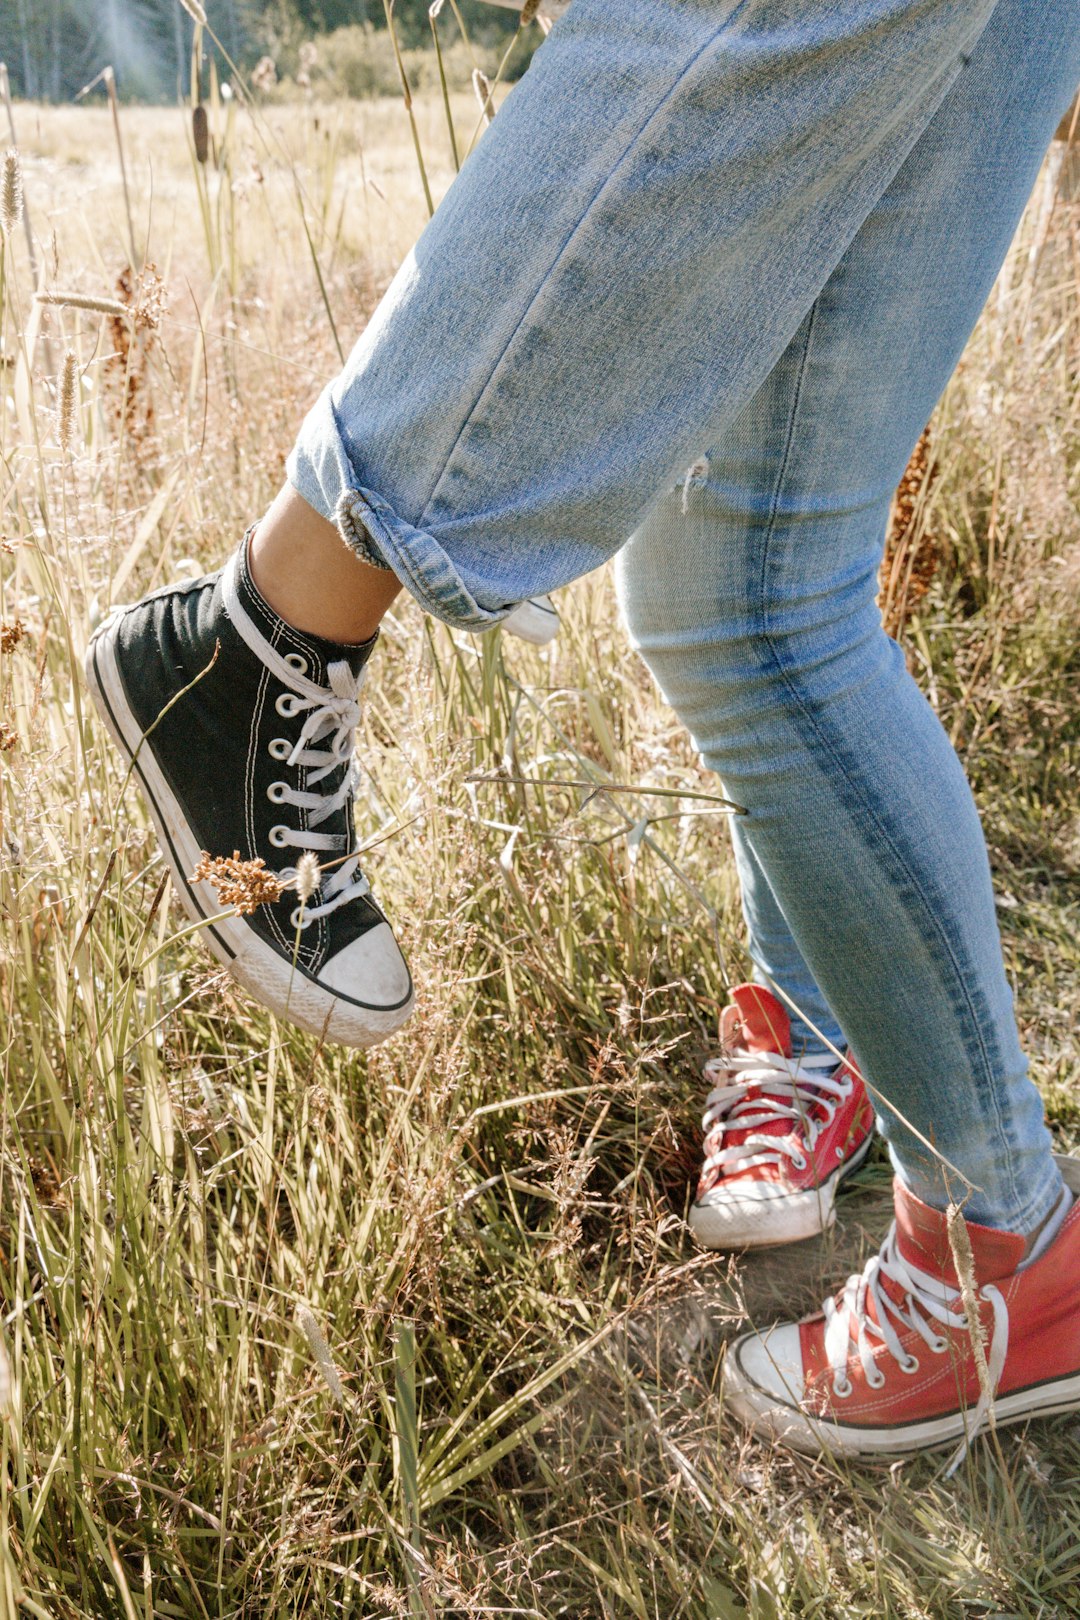 person in blue denim jeans and black and white converse all star high top sneakers